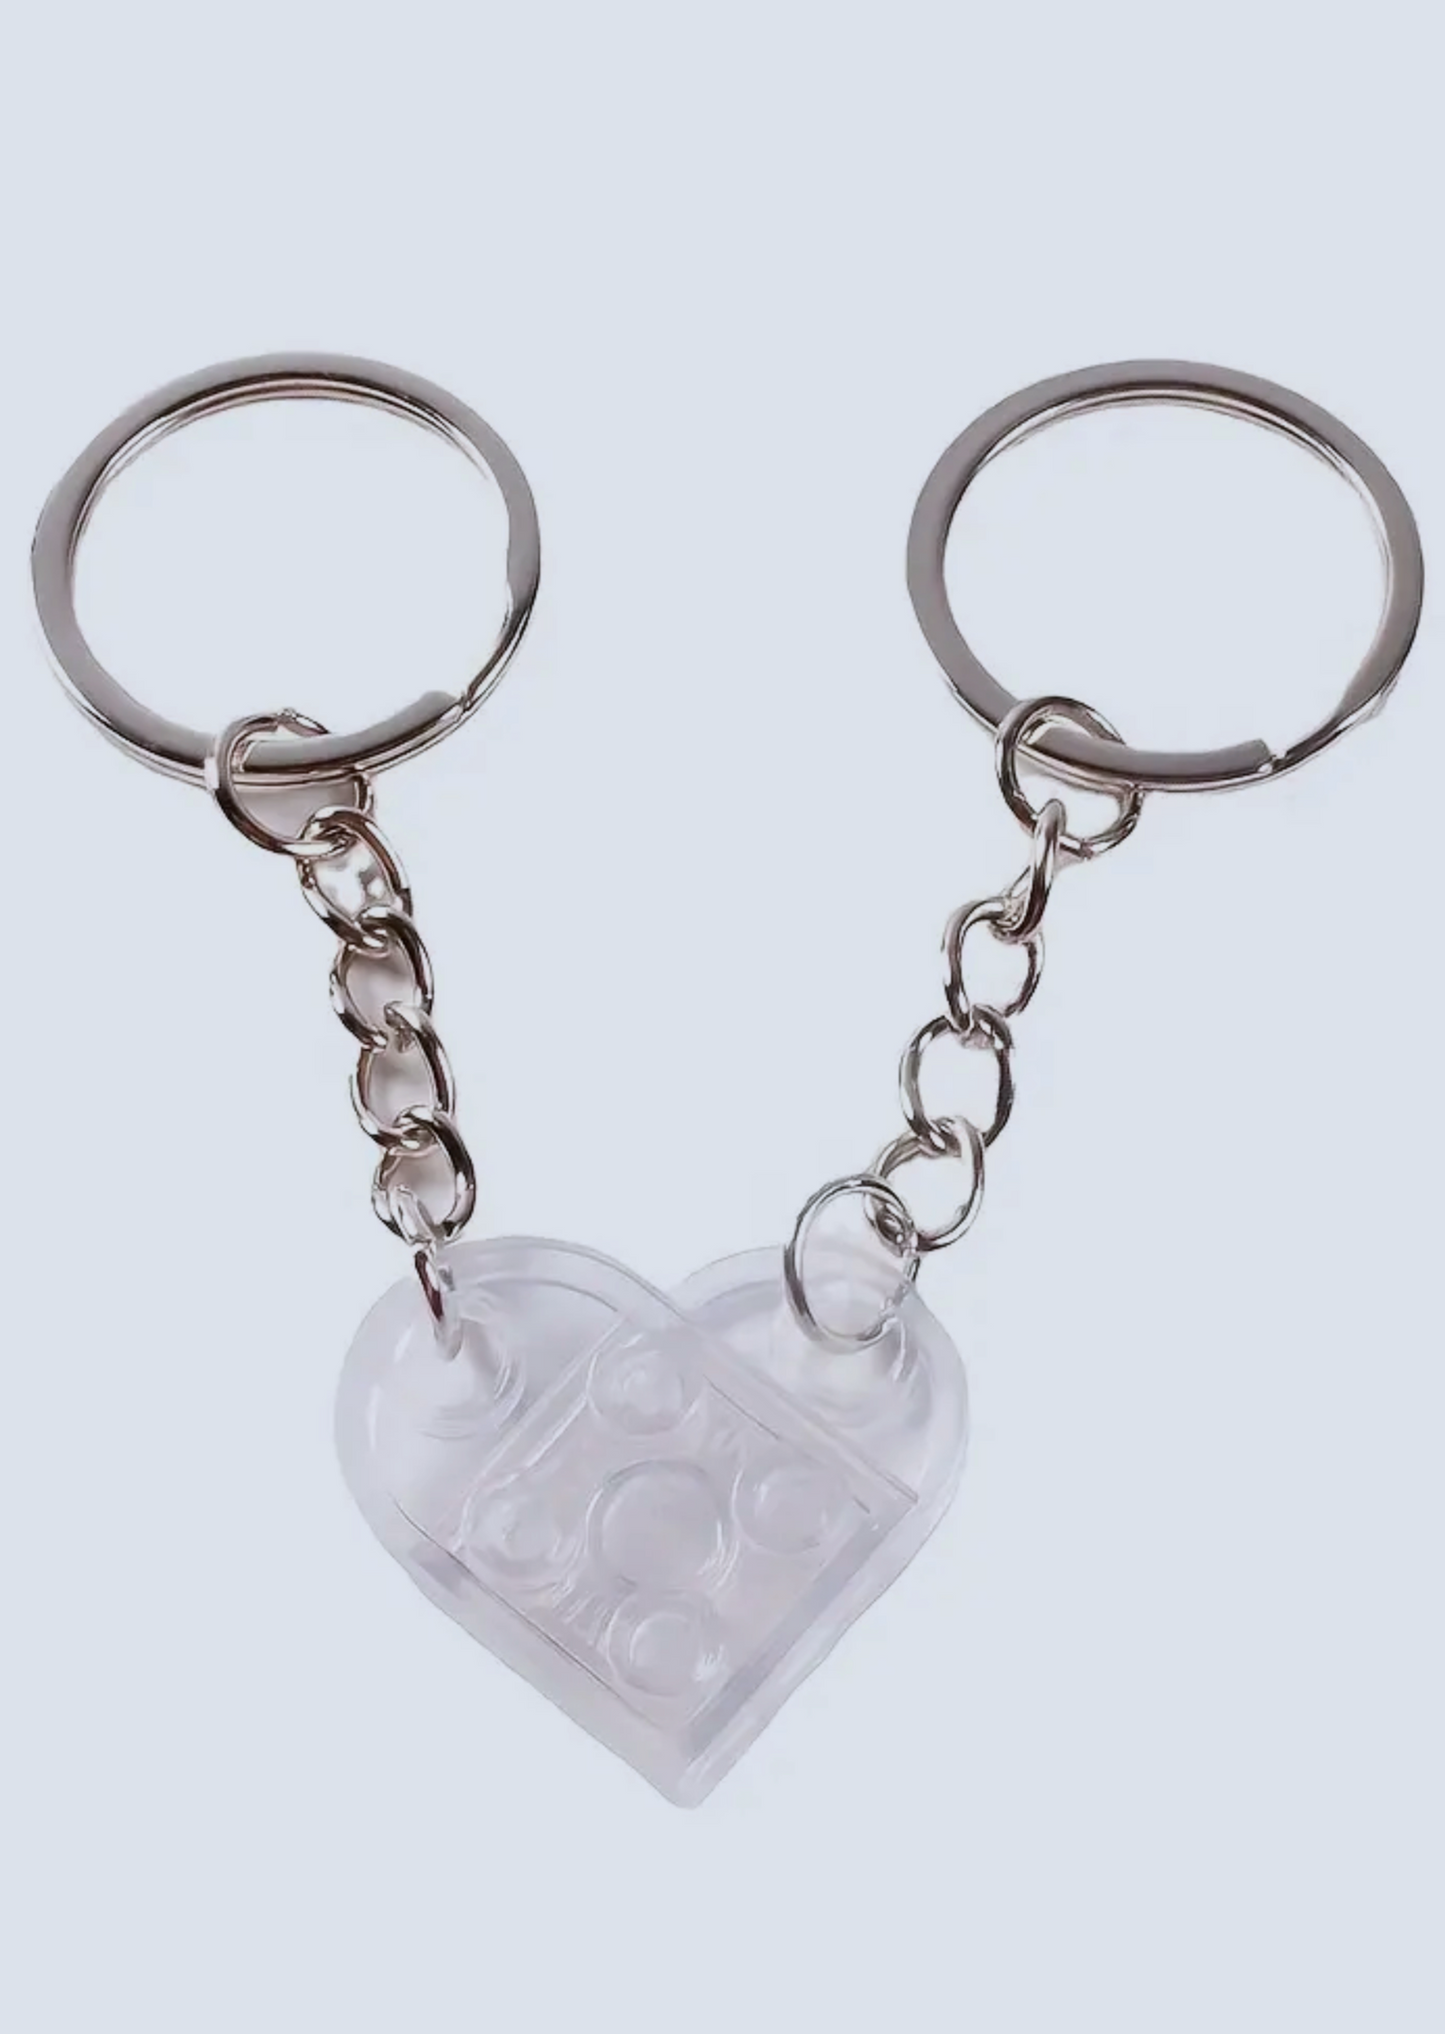 Matching Connecting Brick Keychains